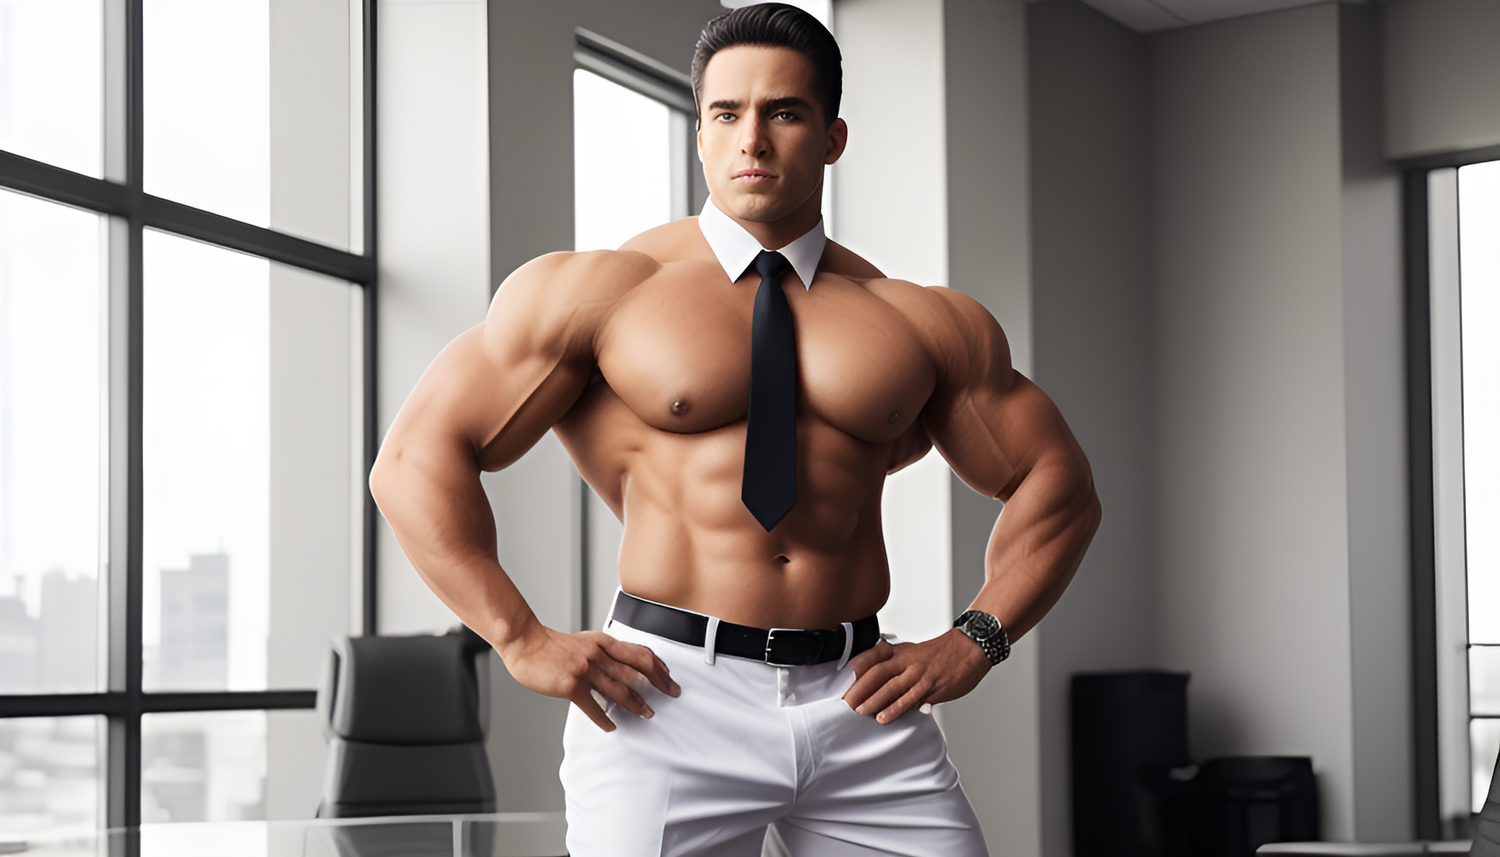 Dress Clothes For Bodybuilders: The Perfect Fit